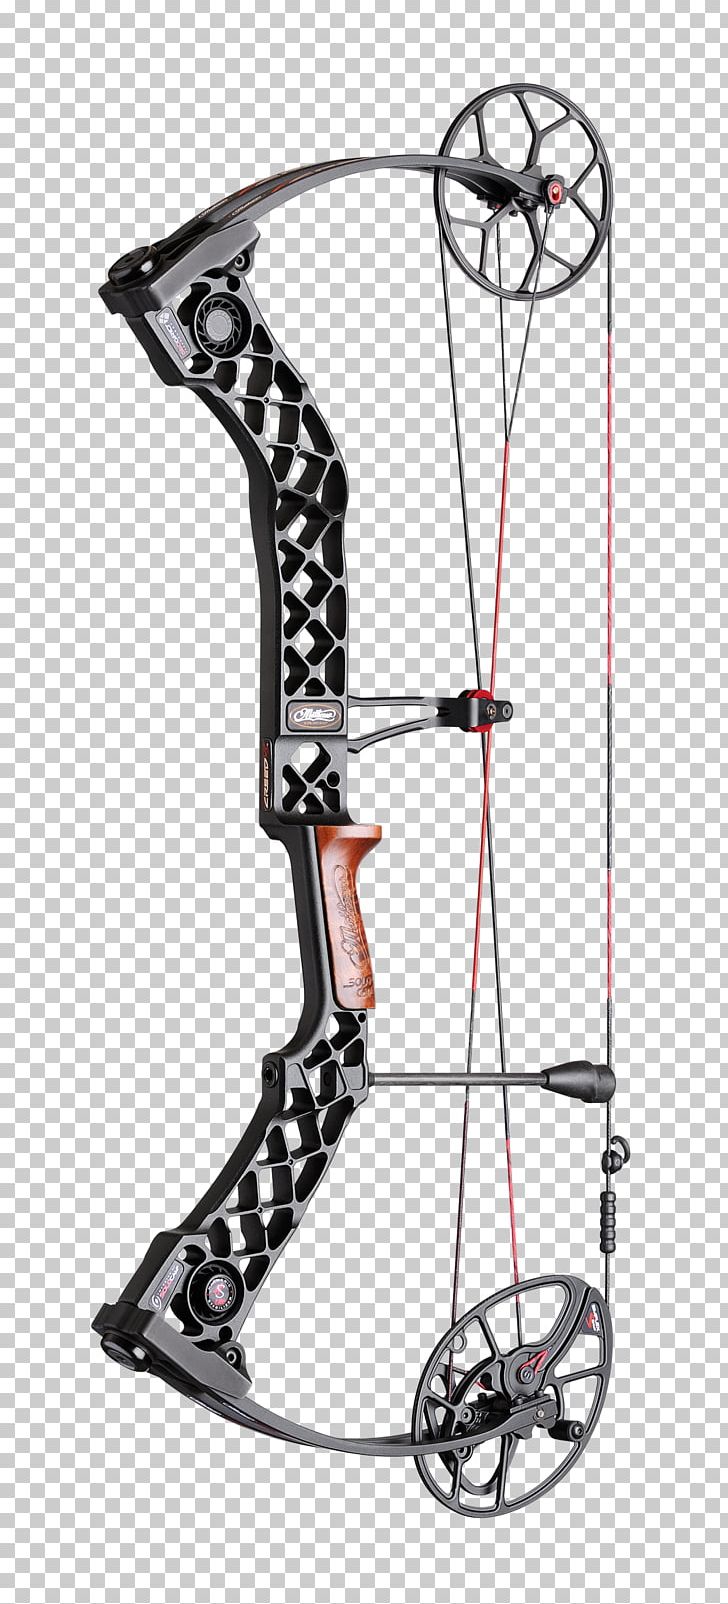 Compound Bows Bowhunting Bow And Arrow Archery PNG, Clipart, Archerry, Archery, Bow, Bow And Arrow, Bowhunting Free PNG Download